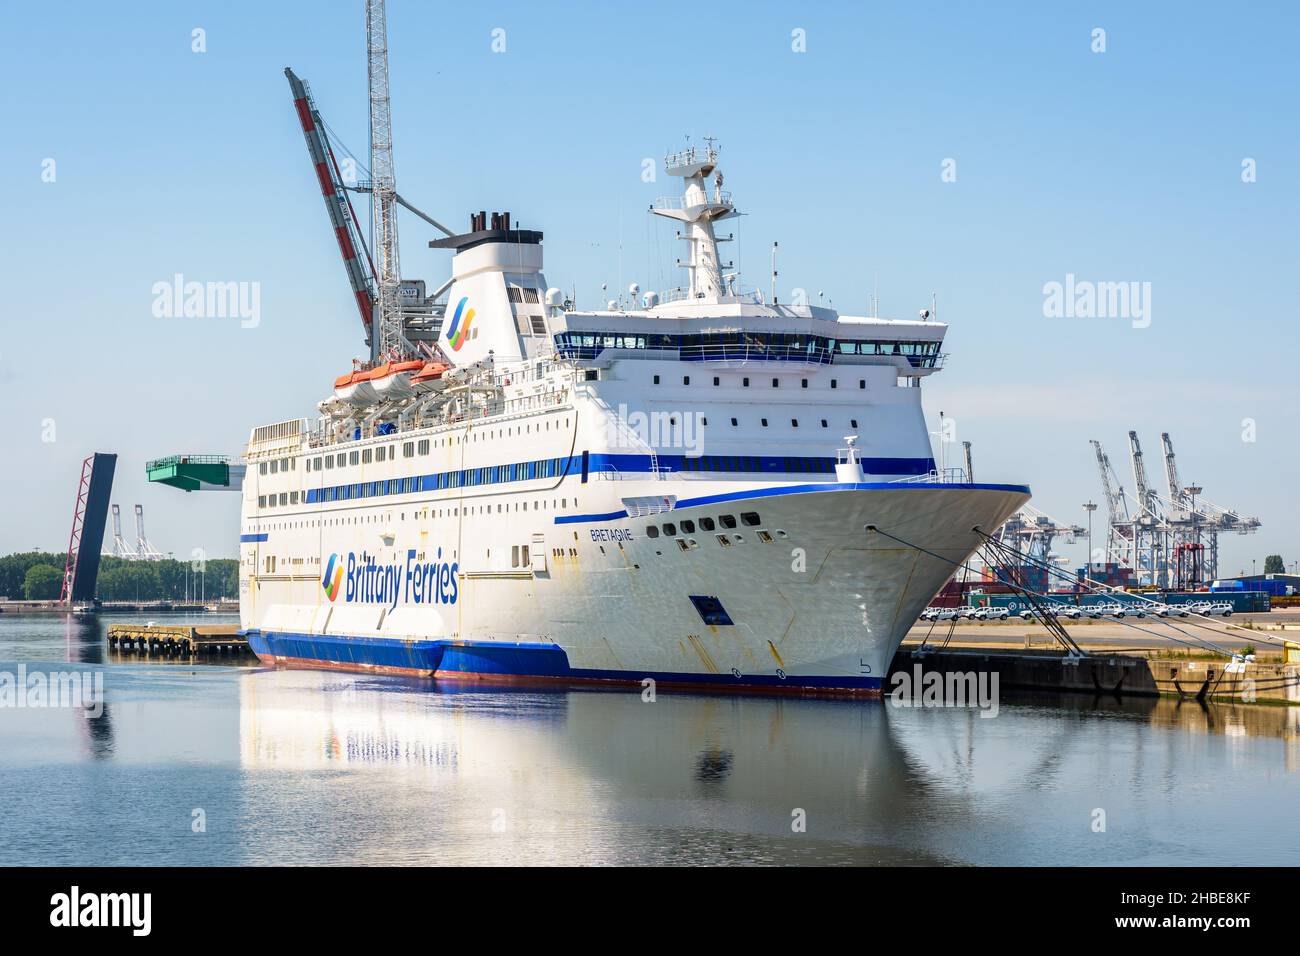 The ferry boat 'Bretagne' from the Brittany Ferries company moored in the port of Le Havre. Stock Photo